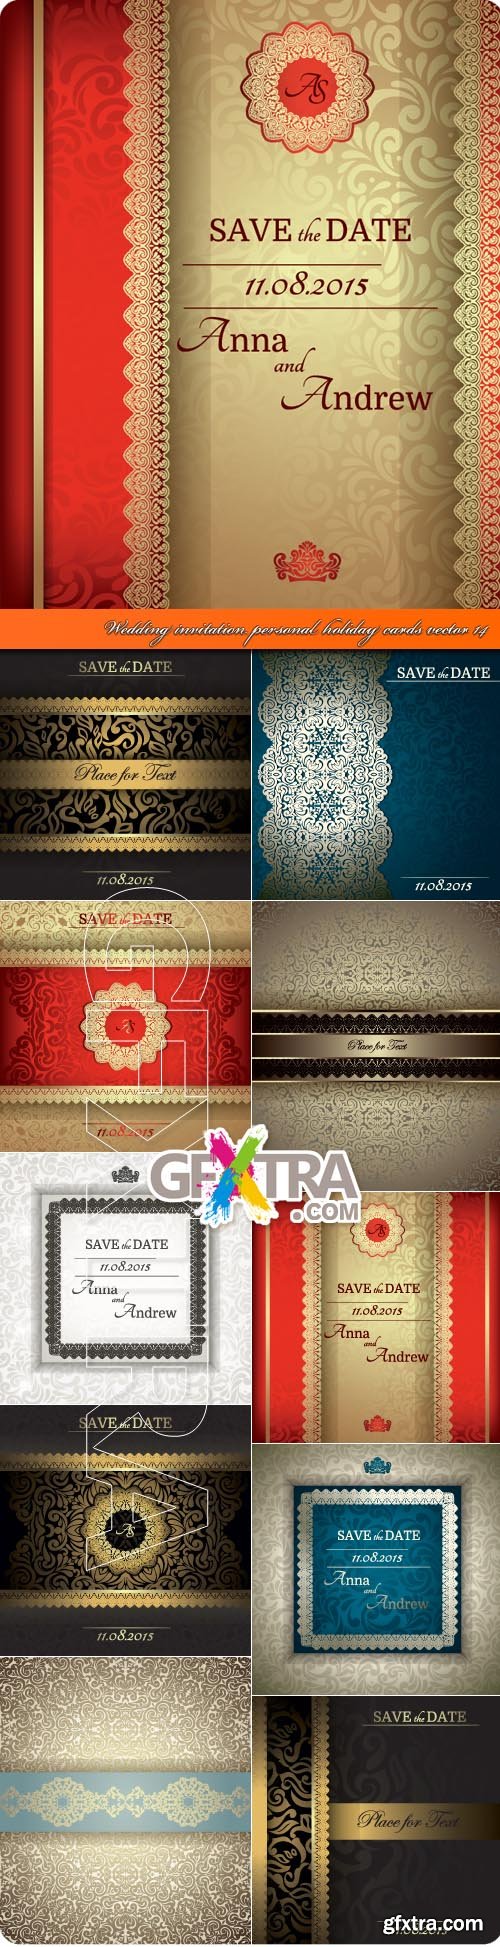 Wedding invitation personal holiday cards vector 14